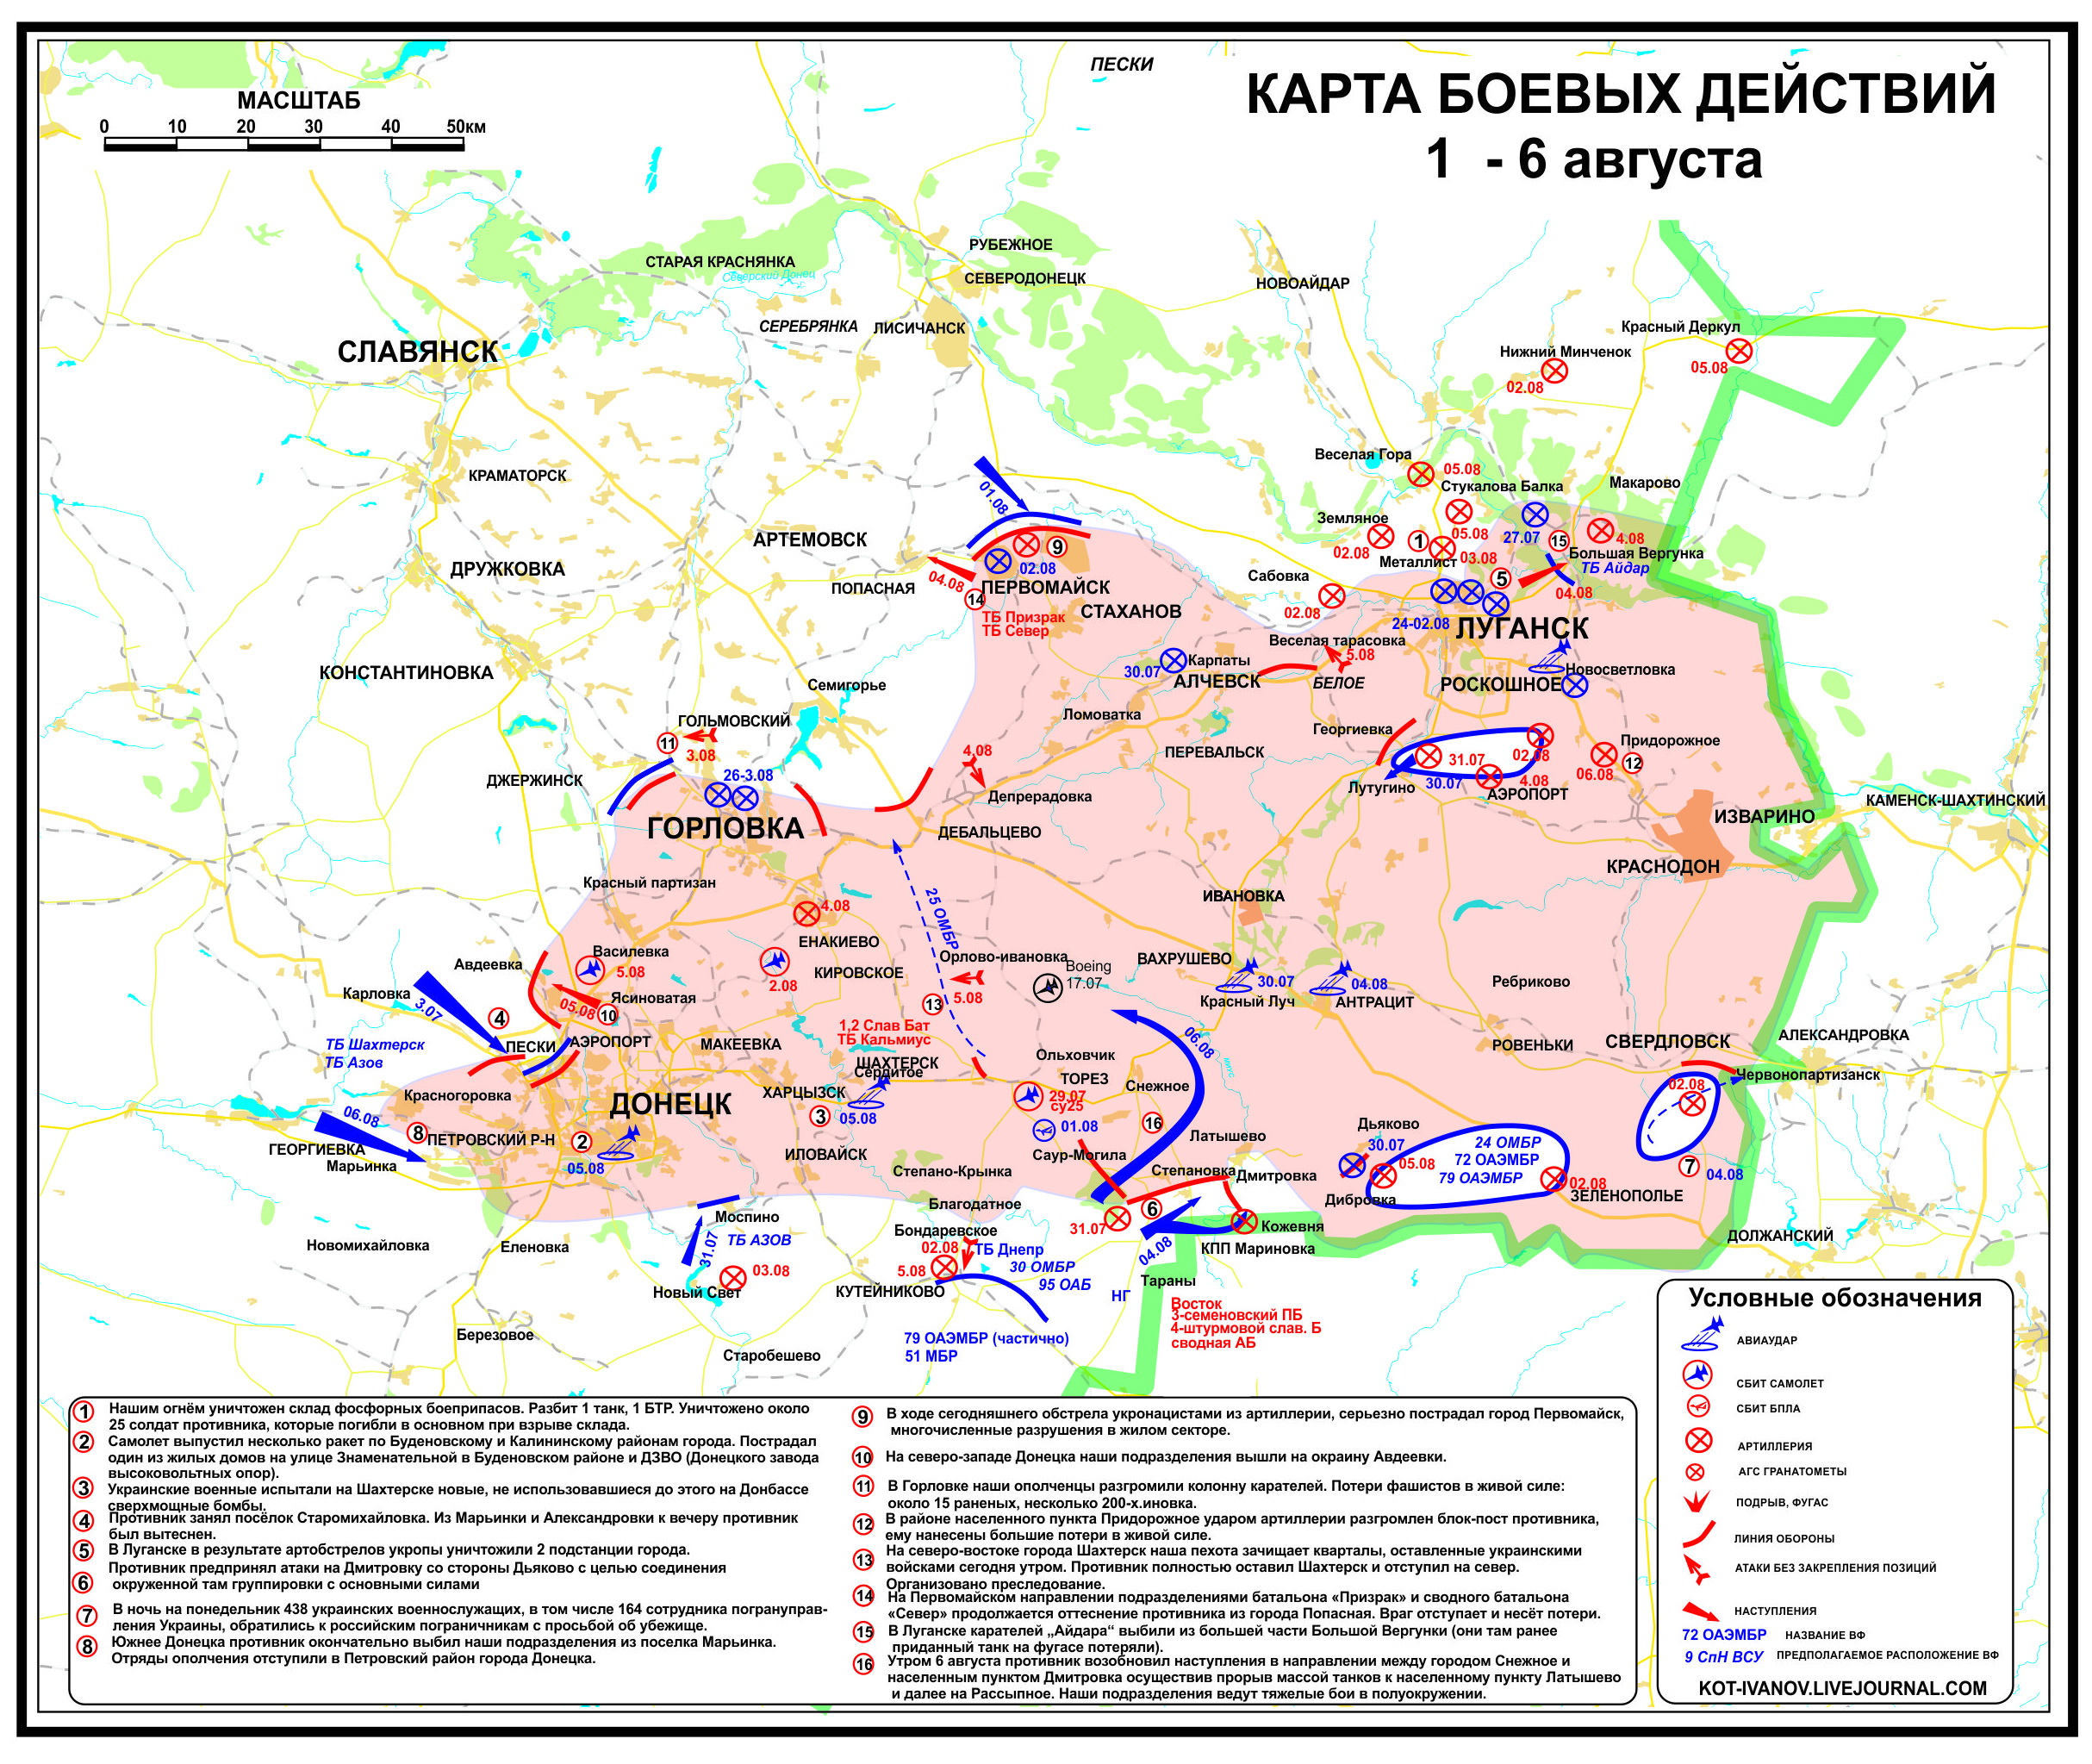 Updated & Mapped: Four Ukrainian Regular Army Brigades Encircled & Wiped Out in month long ‘Southern Cauldron’ Battle (1/3 of it’s peacetime main army units). Will Western & Ukrainian Press Report It? Will N.Y.T. update it’s map?